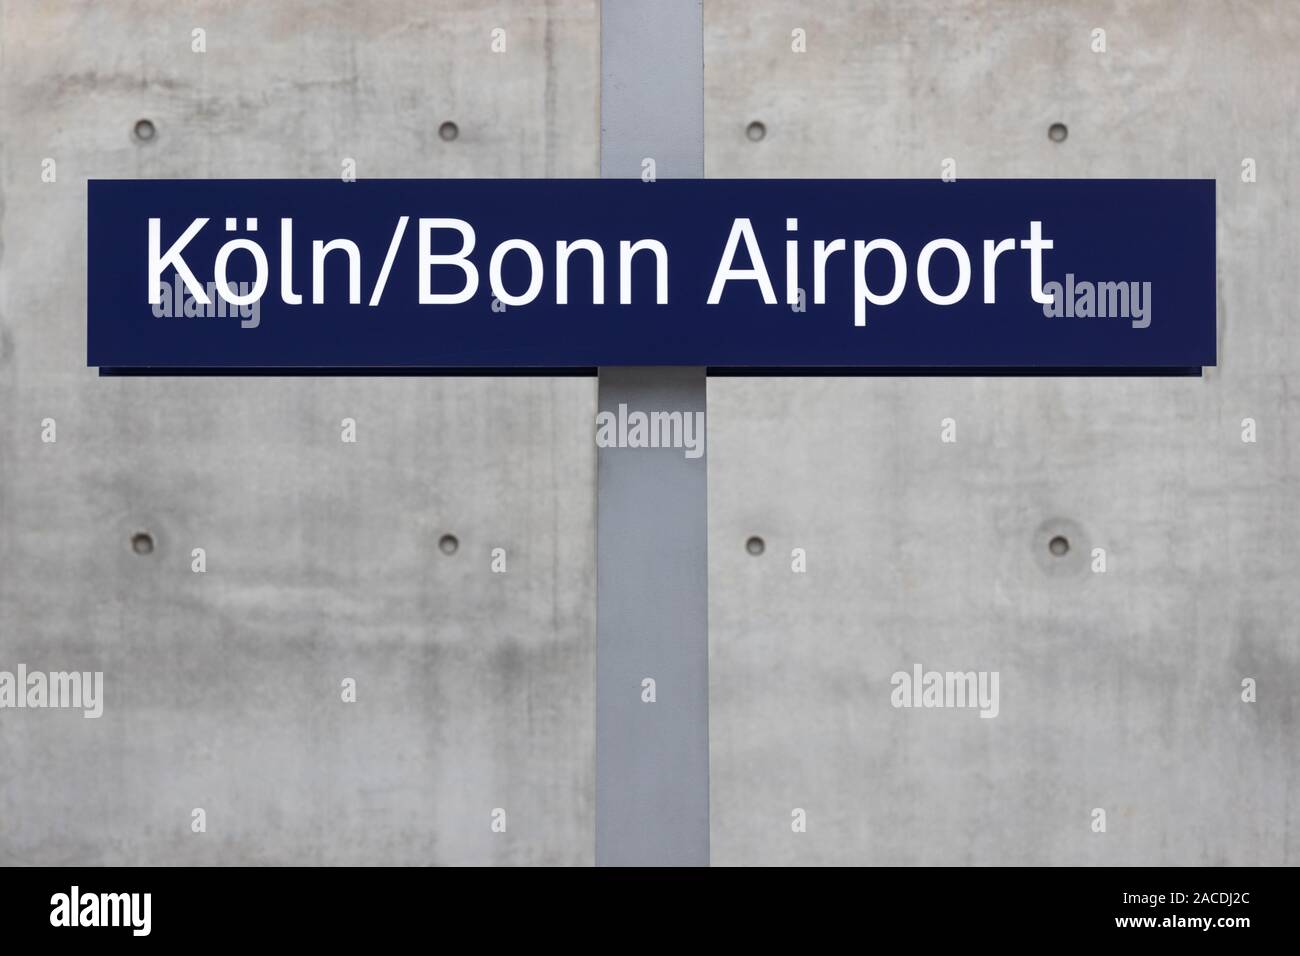 cologne bonn airport sign in germany Stock Photo